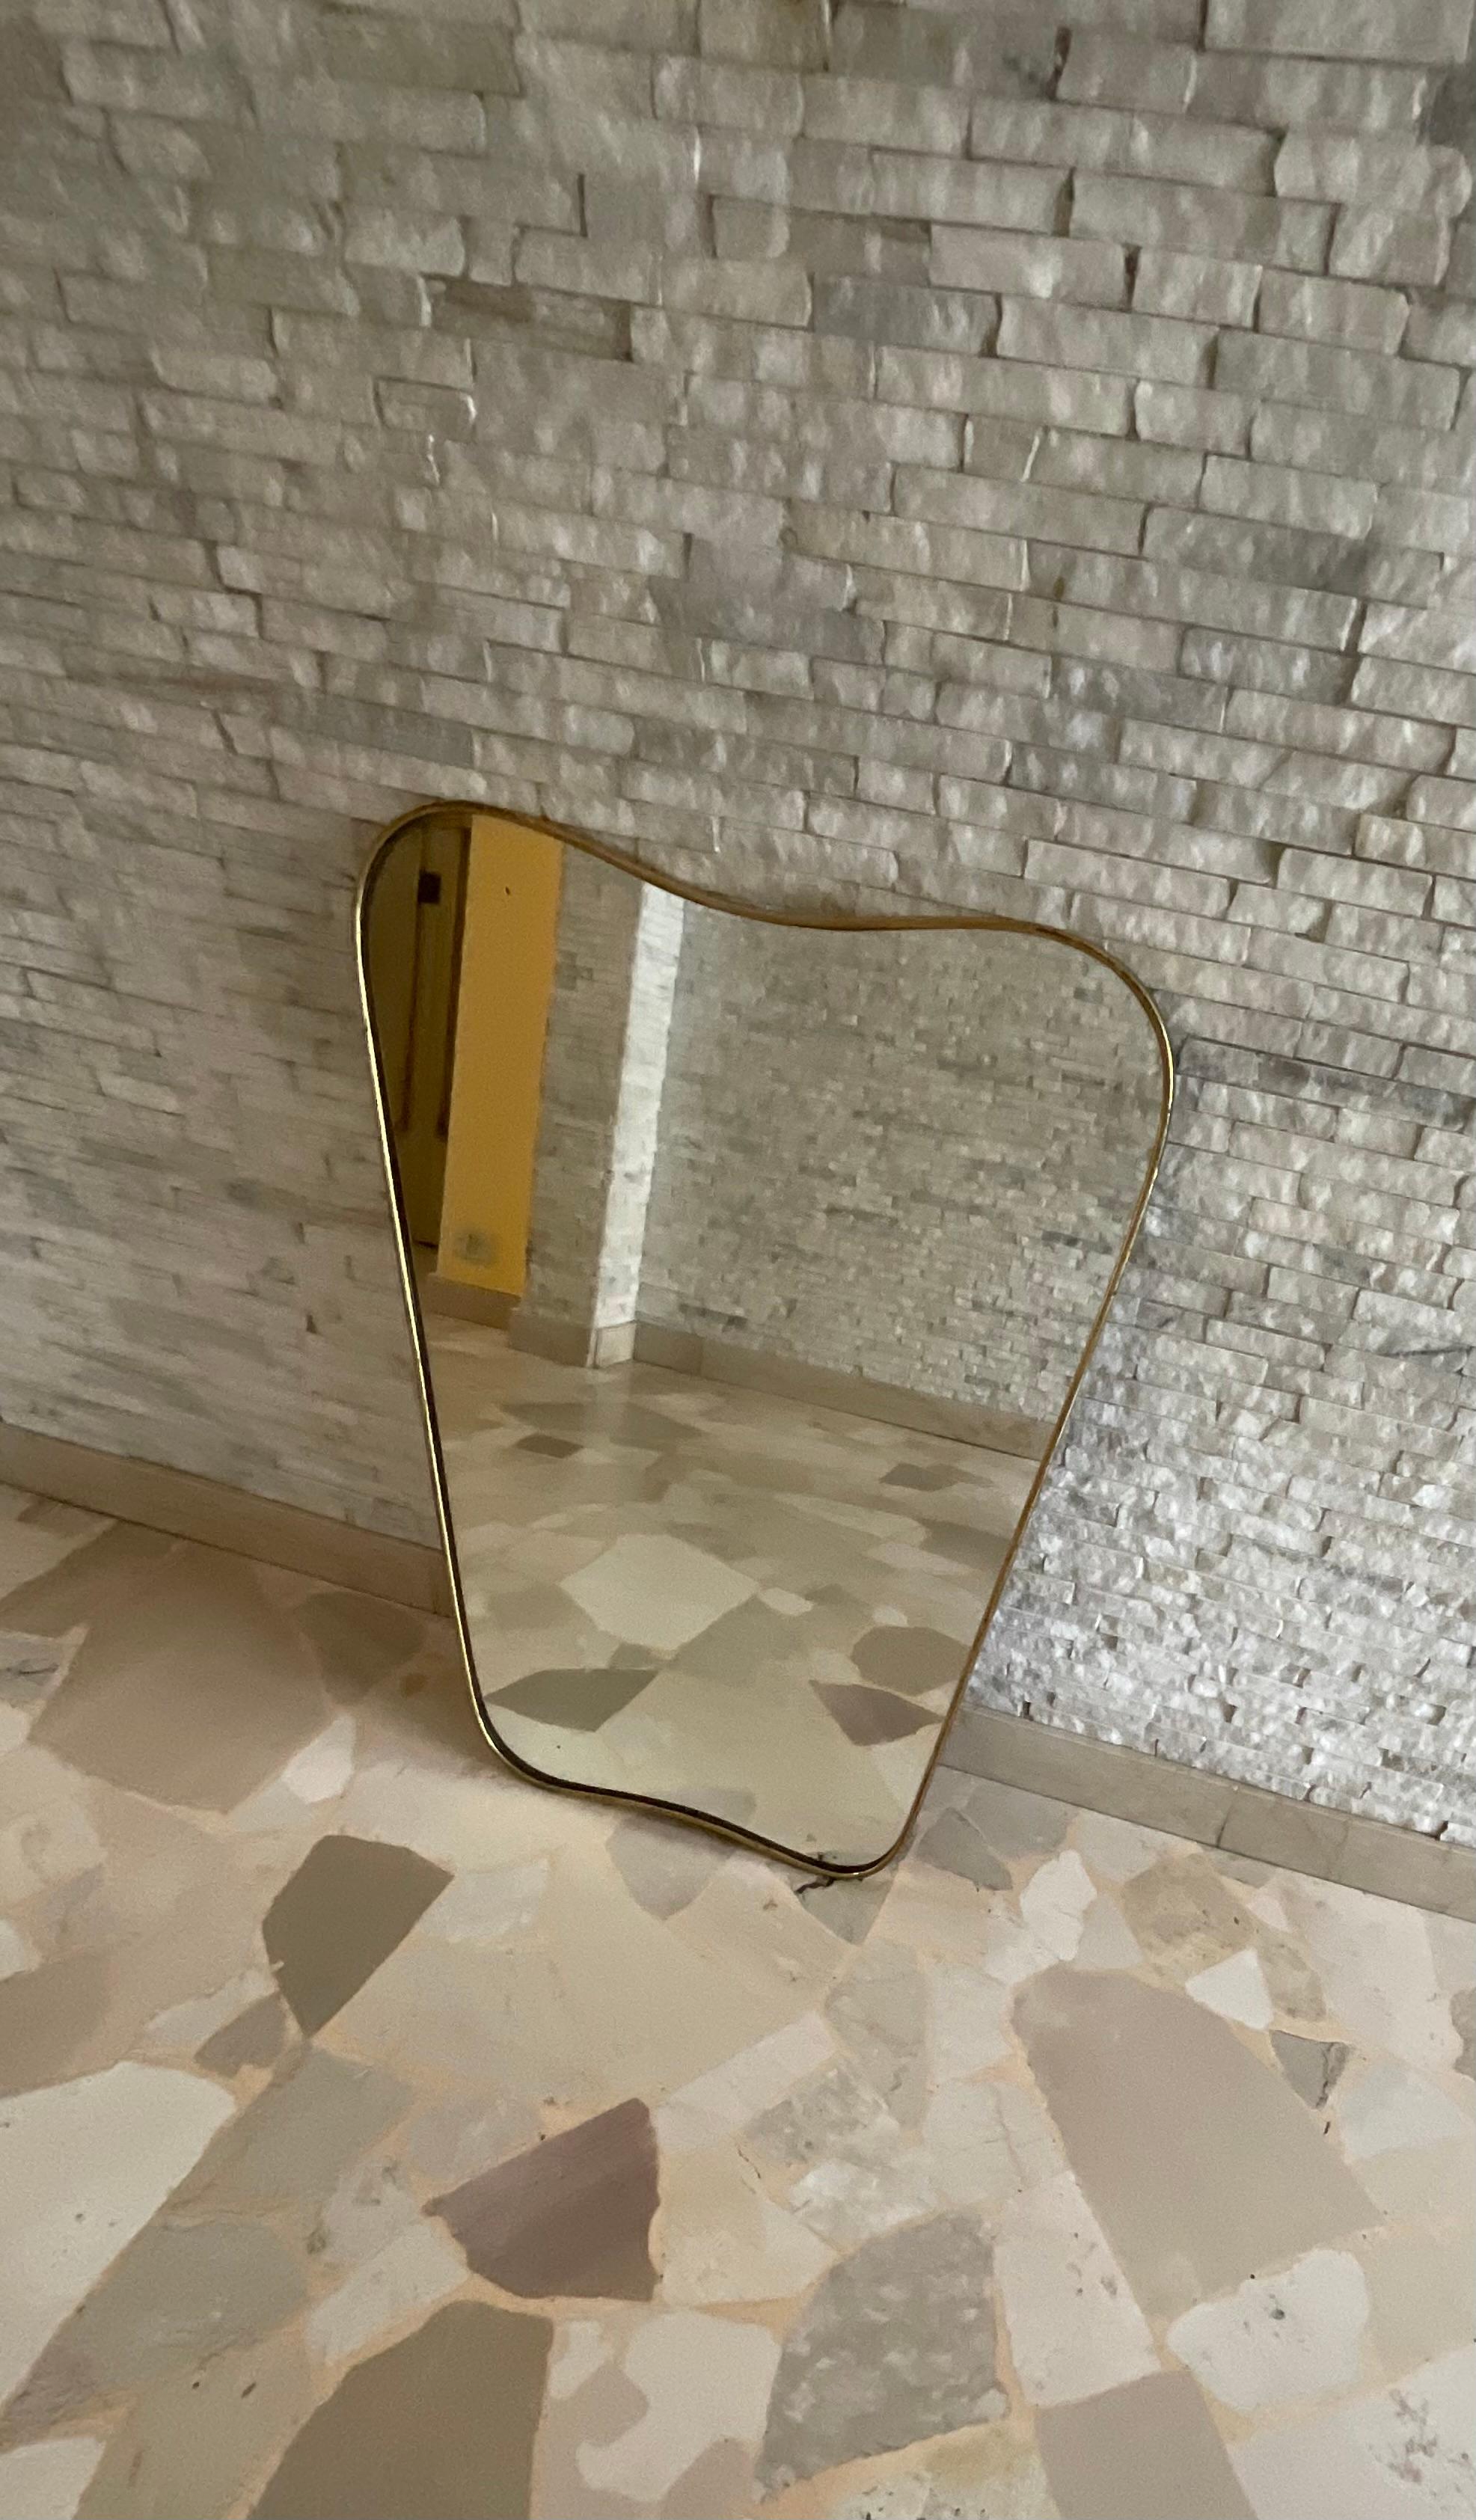 FONTANARTE - mirror attributed for quality, clean and elegant line to PIETRO CHIESA .
It has the brass frame with patina and some small signs of time because it is original from 1950.
Measures:  Width at the top is 55 cm
              Width at the